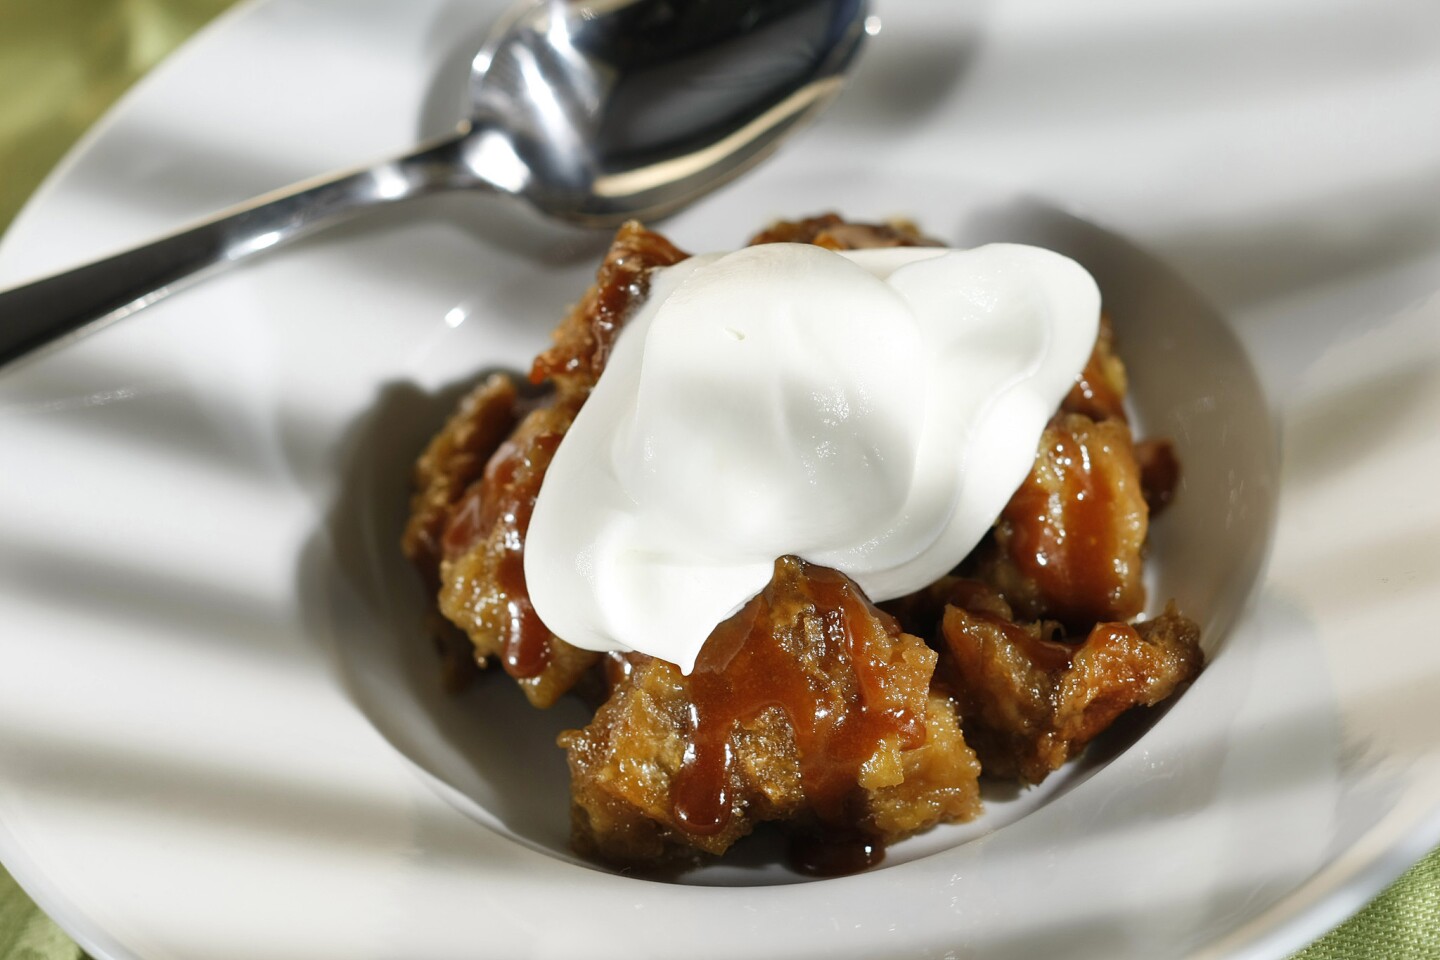 Do you like bananas Foster? Then you'll love this.